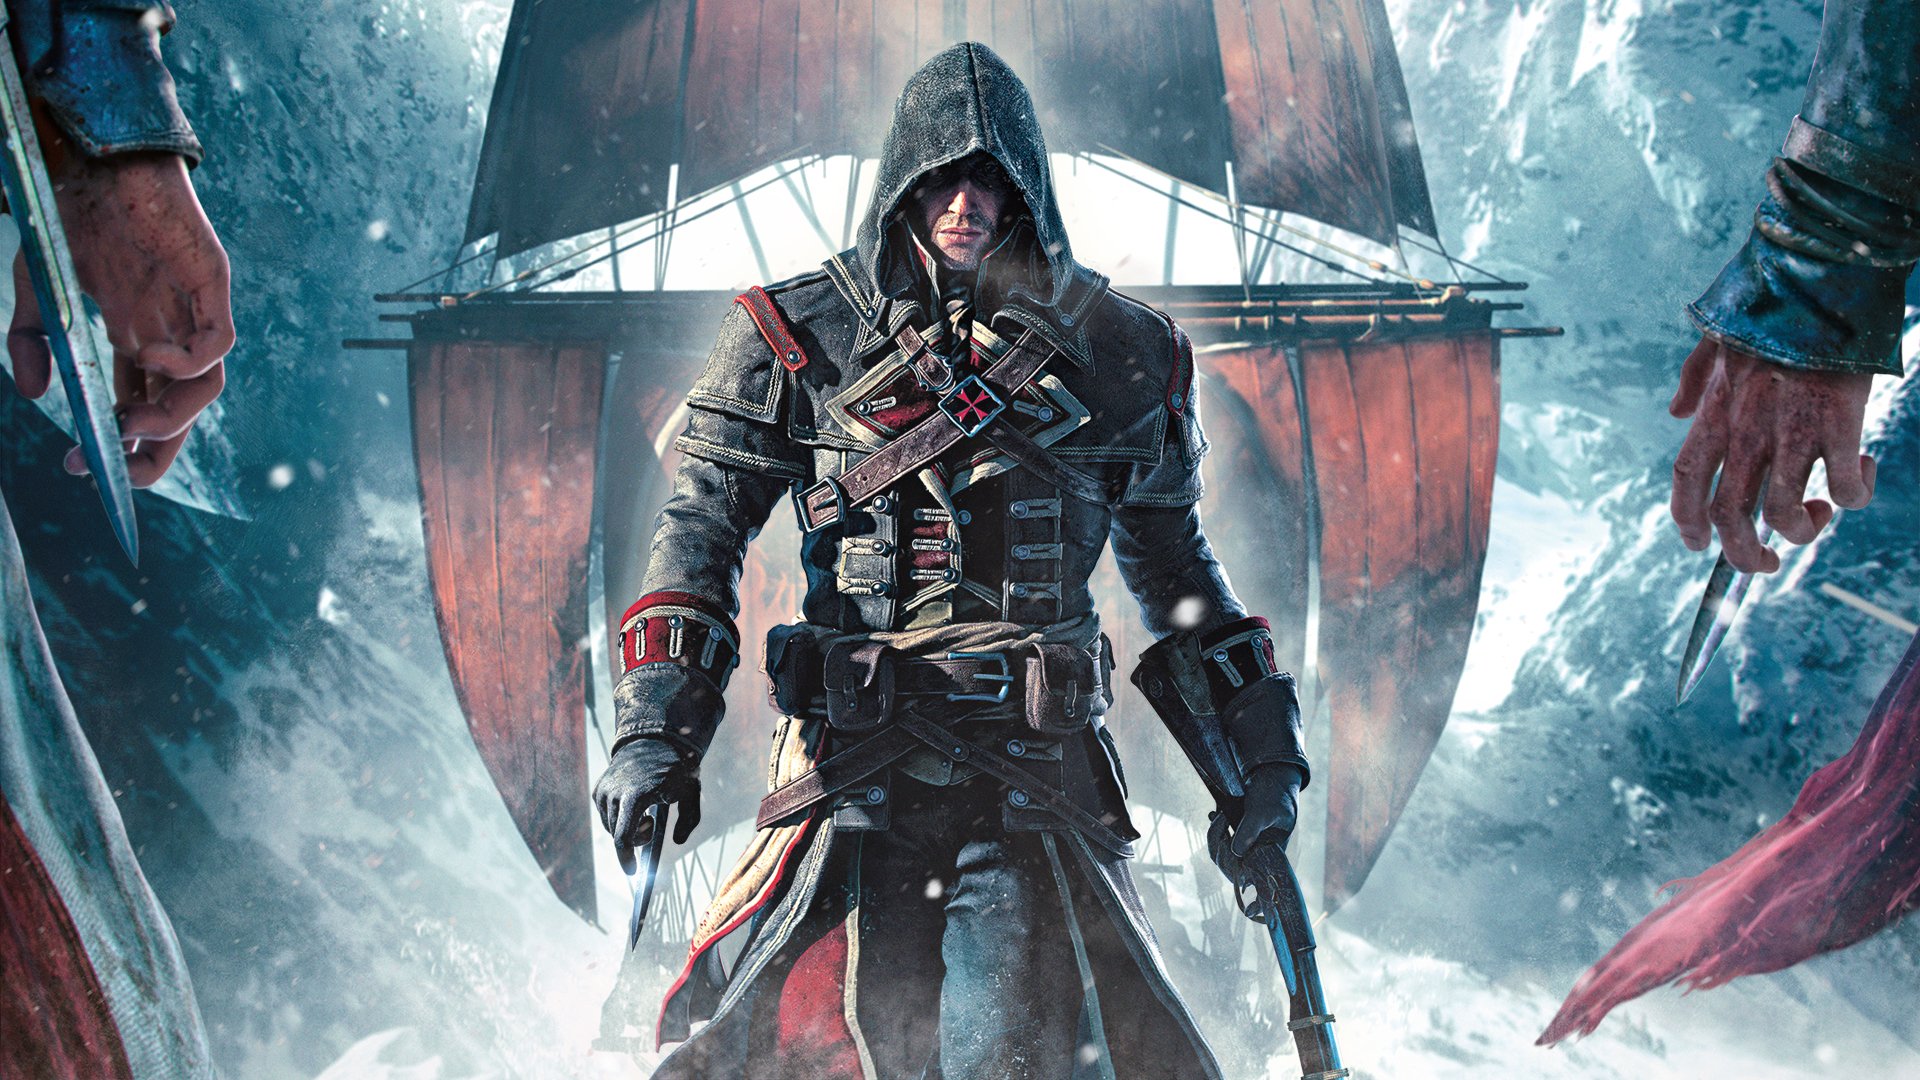 Assassin's Creed: Rogue - Hunter Outfit Gameplay [HD] 